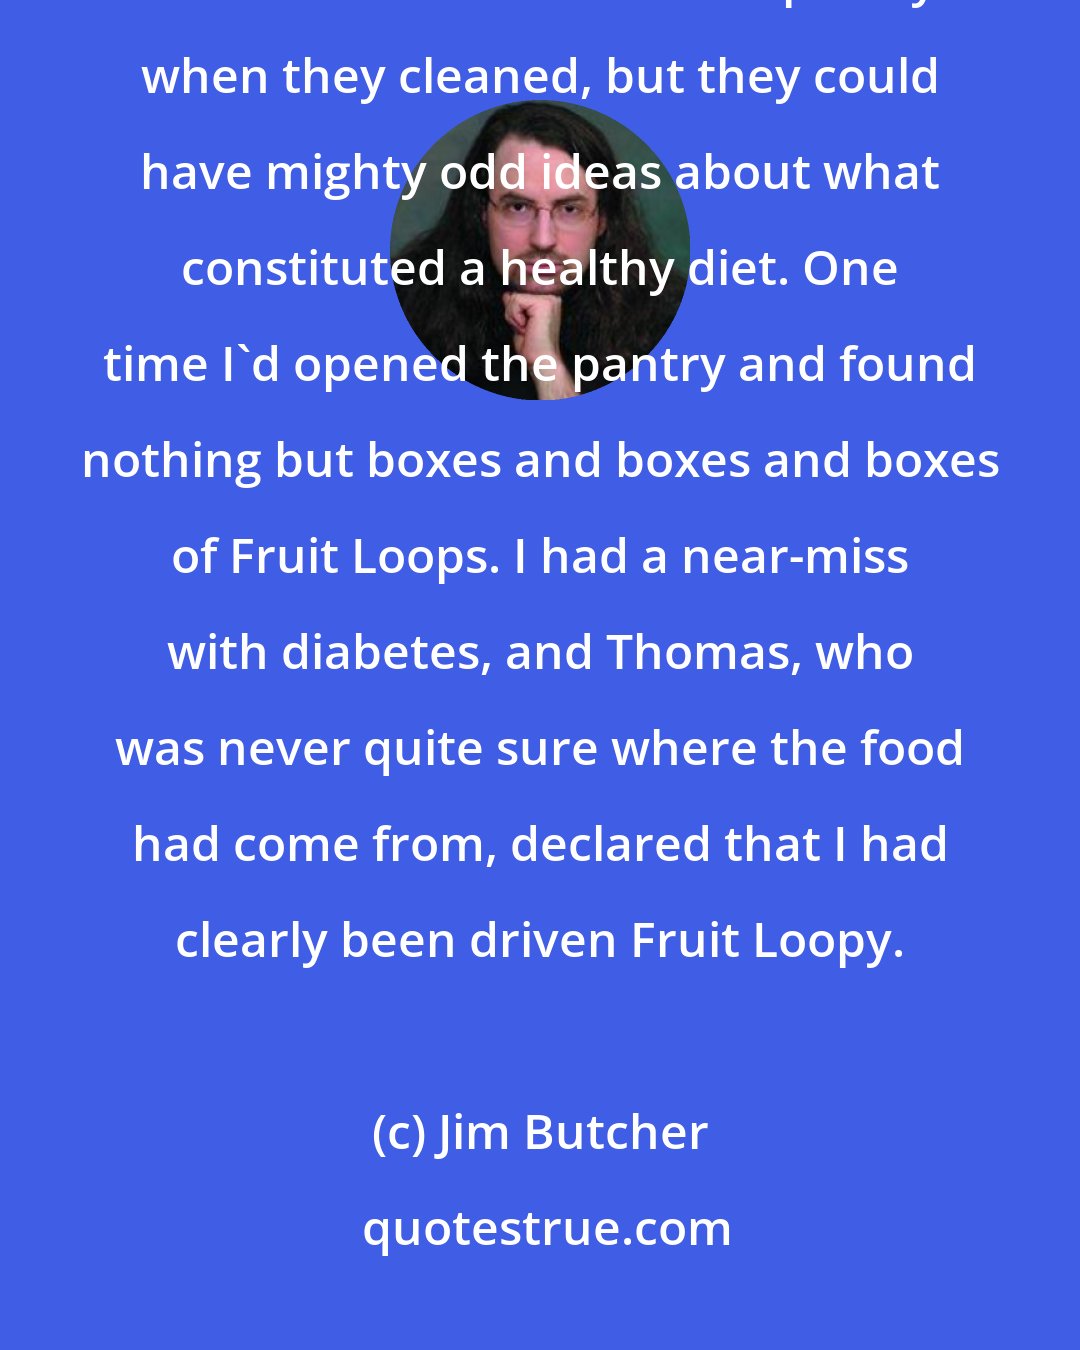 Jim Butcher: I checked the icebox. The faeries usually brought some sort of food to stock the icebox and the pantry when they cleaned, but they could have mighty odd ideas about what constituted a healthy diet. One time I'd opened the pantry and found nothing but boxes and boxes and boxes of Fruit Loops. I had a near-miss with diabetes, and Thomas, who was never quite sure where the food had come from, declared that I had clearly been driven Fruit Loopy.